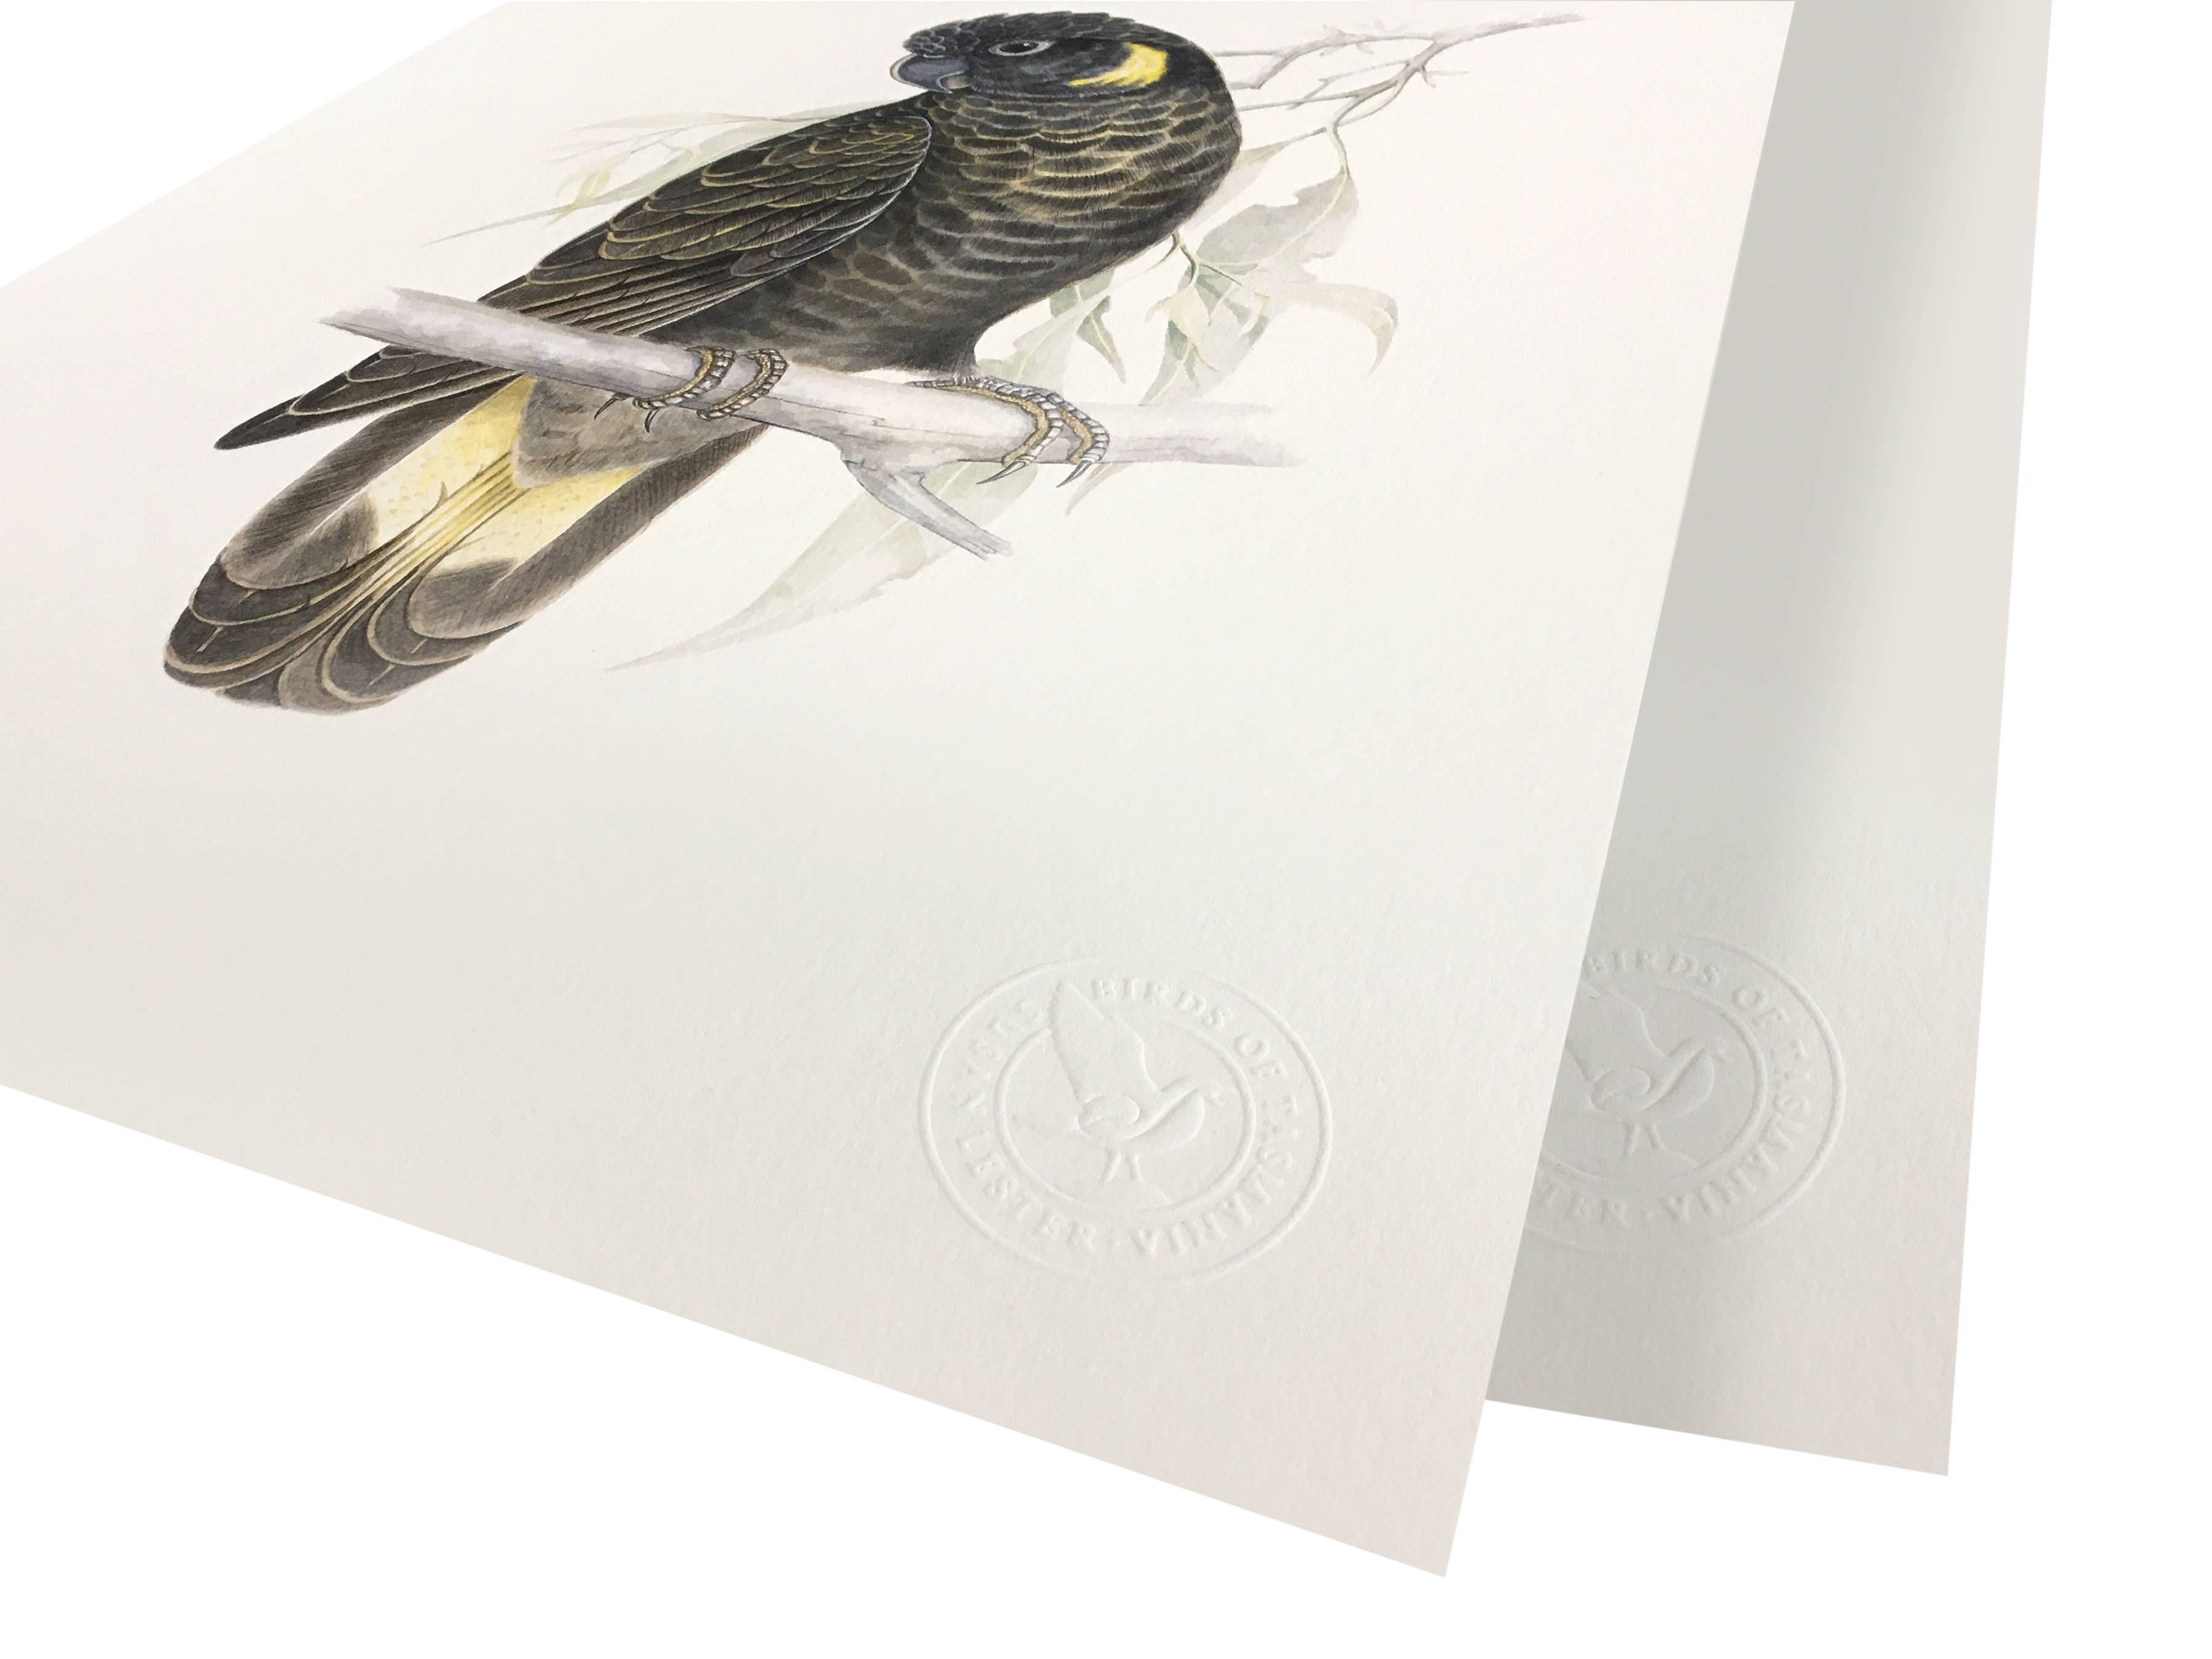 A close-up of the embossed seal which indicates the authenticity of the fine art digital archival prints.